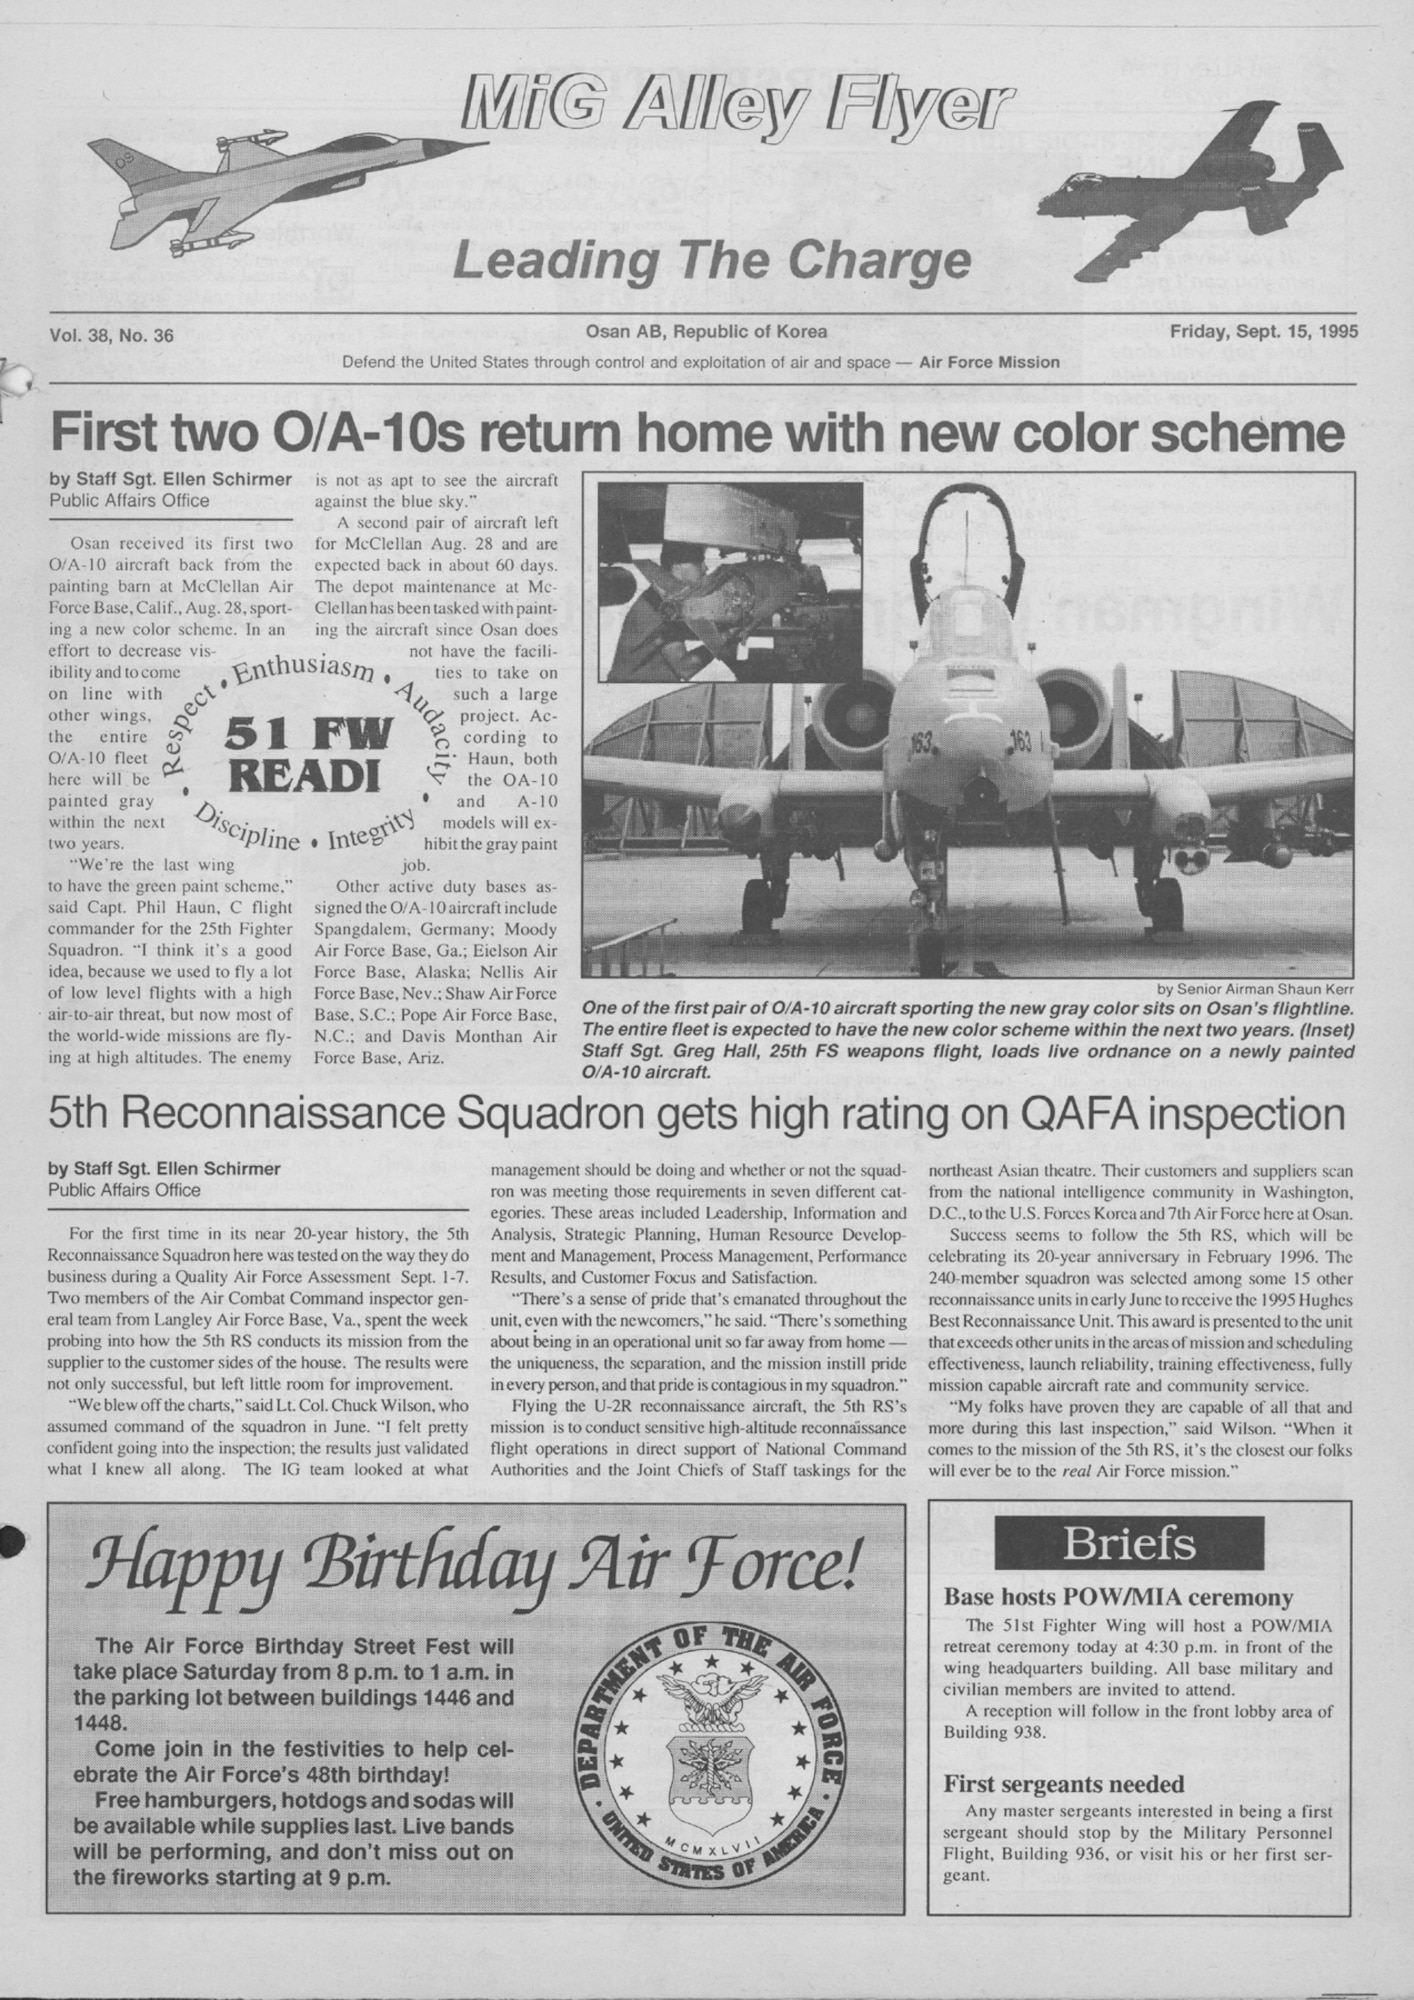 OSAN AIR BASE, Republic of Korea --  This is the front page of the MiG Alley Flyer from Sept. 15, 1995. Osan's paper changed it's name to MiG Alley Flyer in 1982.